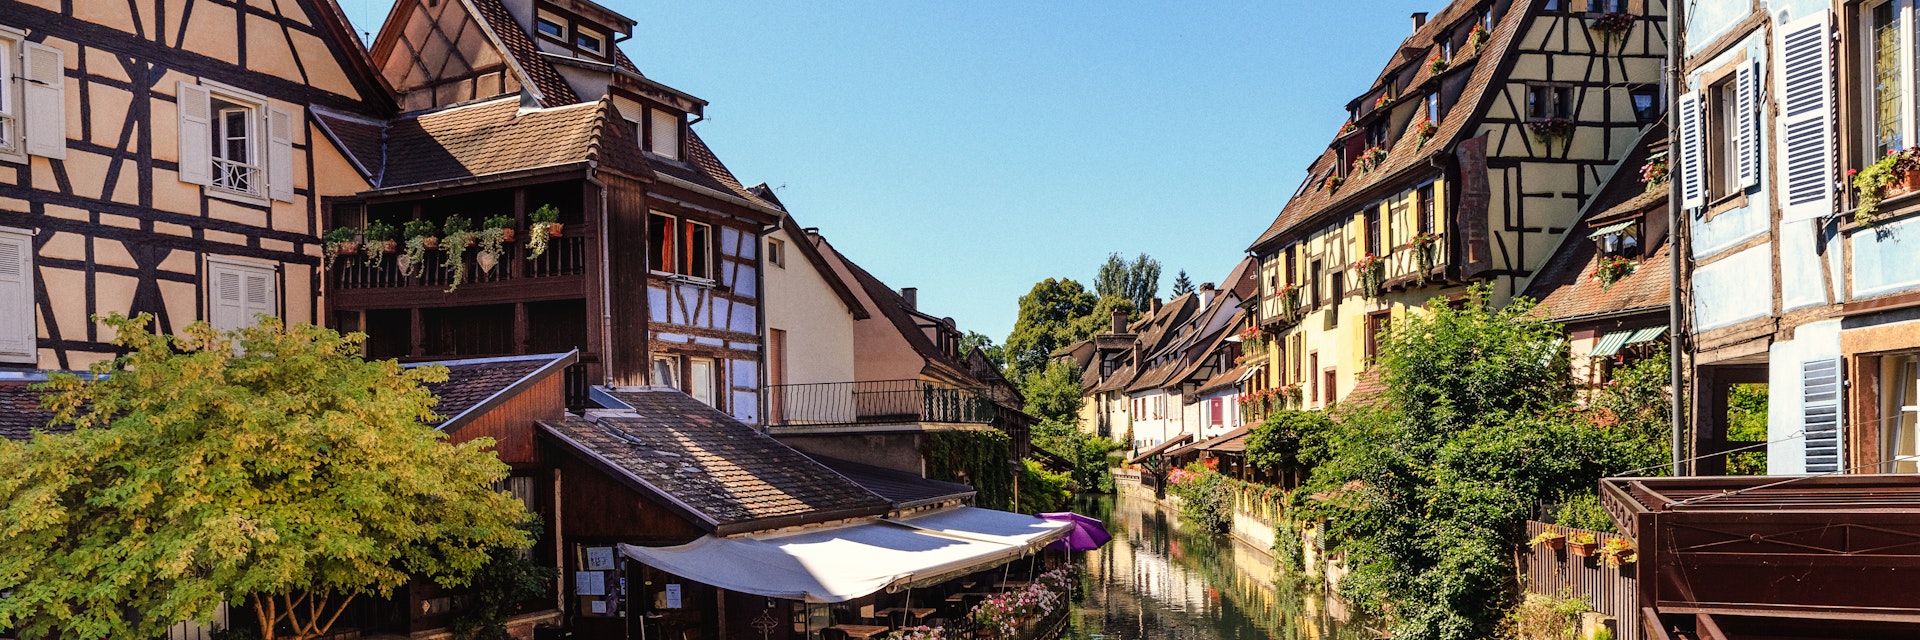 Old colorful half-timbered houses in the quatrer Petite Venise (Little Venice) in Colmar, France.; Shutterstock ID 748217683; your: Sloane Tucker; gl: 65050; netsuite: Online Editorial; full: POI
748217683